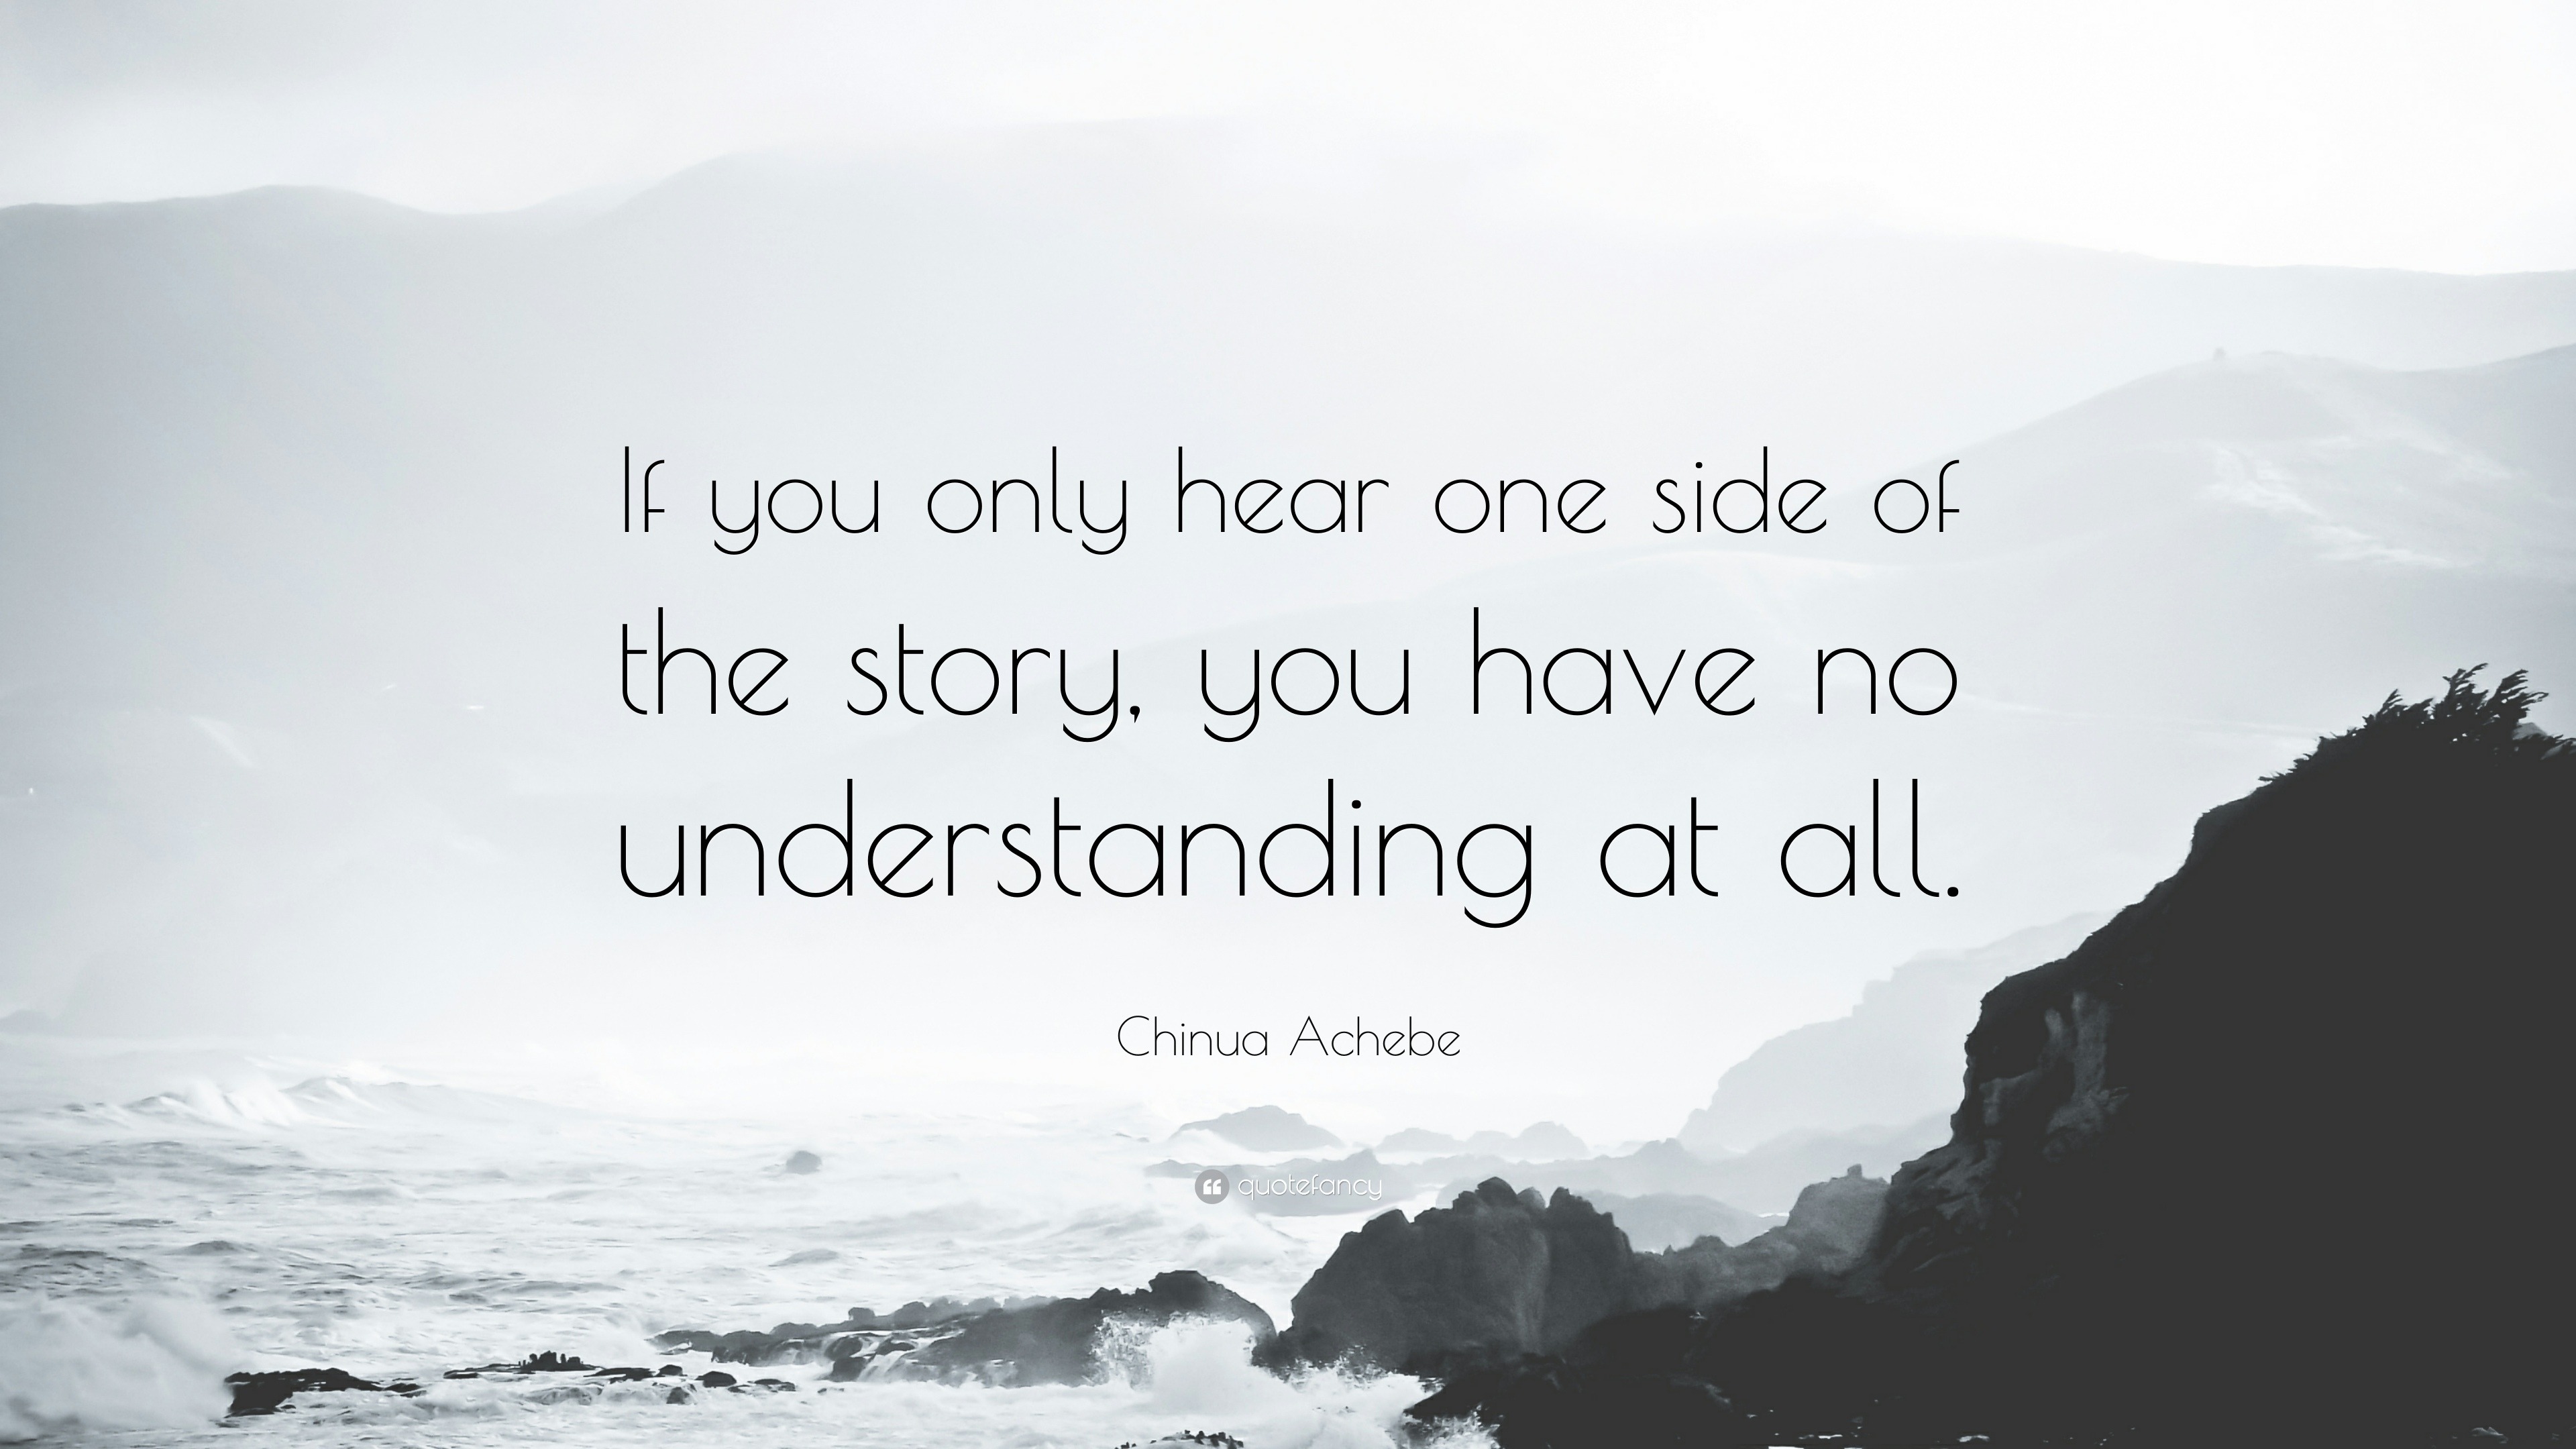 https://quotefancy.com/media/wallpaper/3840x2160/299099-Chinua-Achebe-Quote-If-you-only-hear-one-side-of-the-story-you.jpg